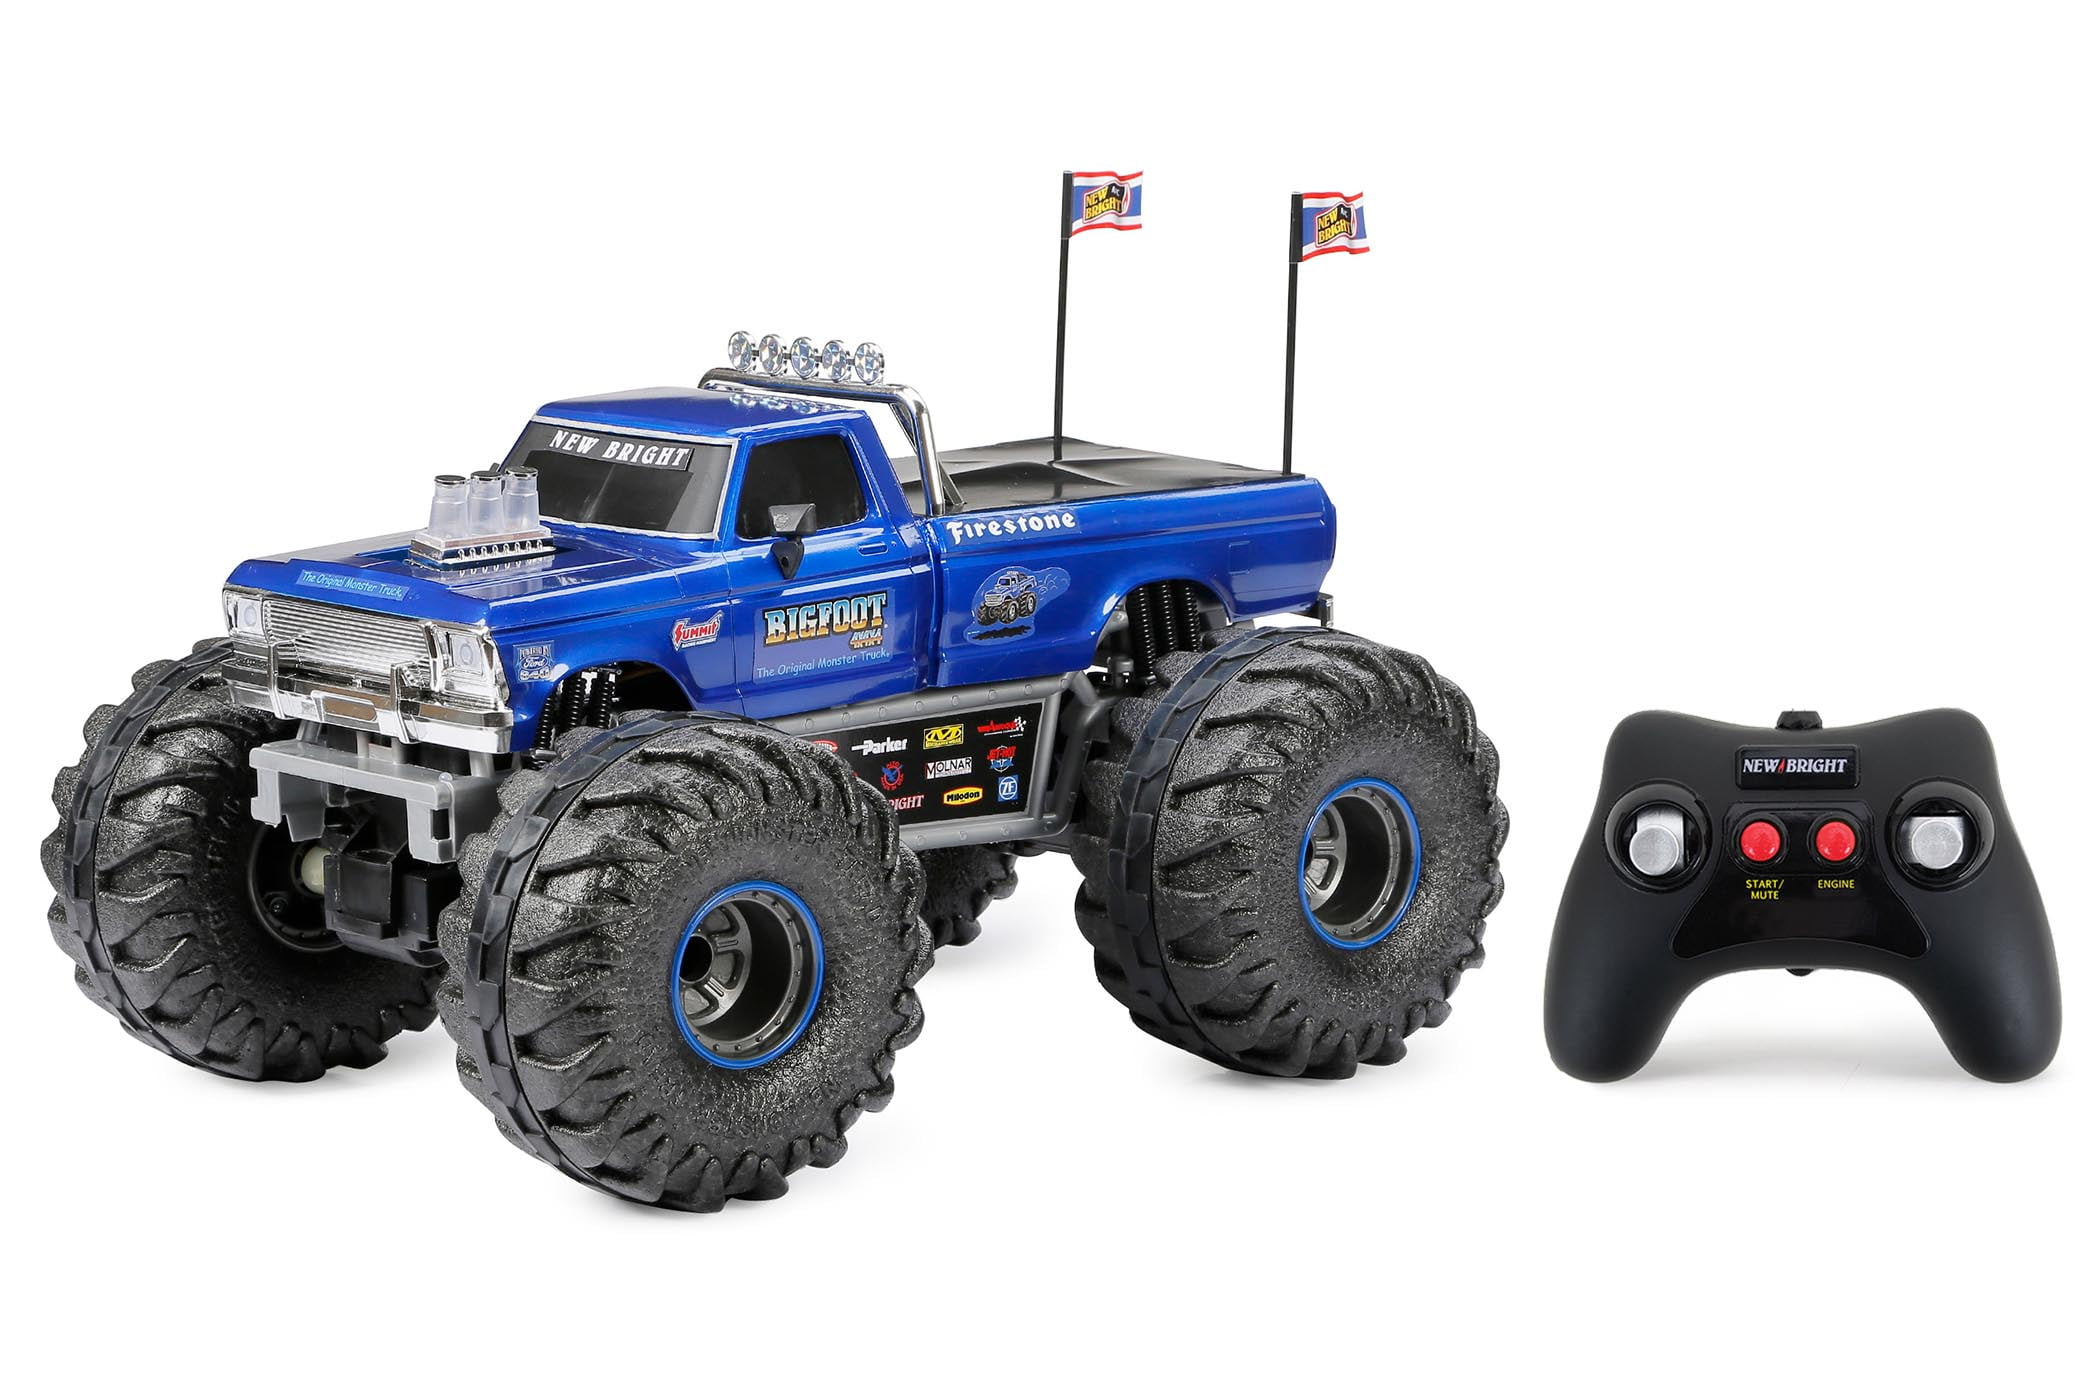 New Bright (1:10) Bigfoot Battery Radio Control Monster Truck with Lights  and Sounds, 61086UEP - Walmart.com